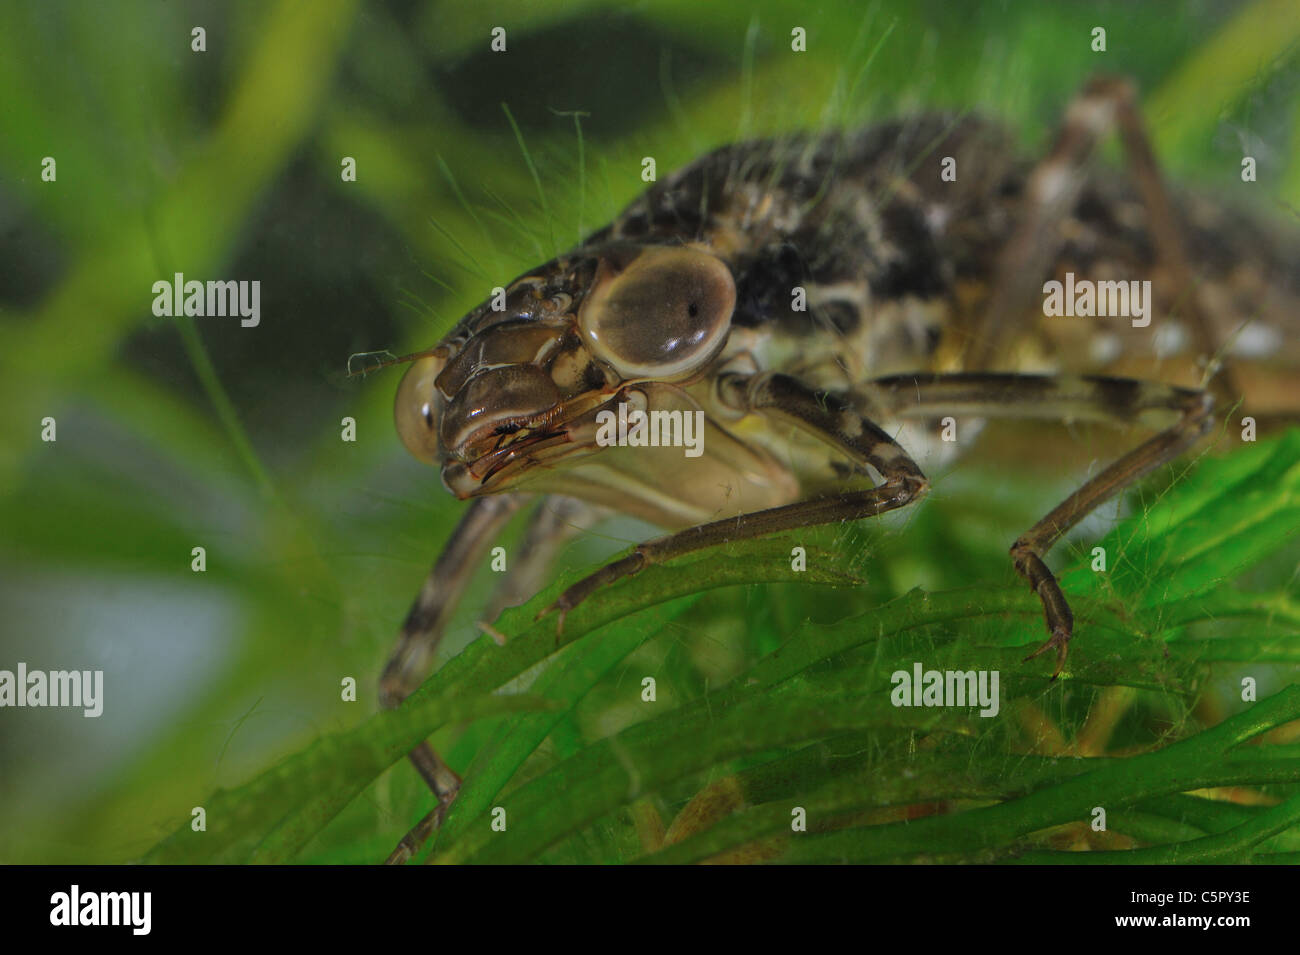 Head details of a dragonfly larva under water in a little pool at spring Stock Photo